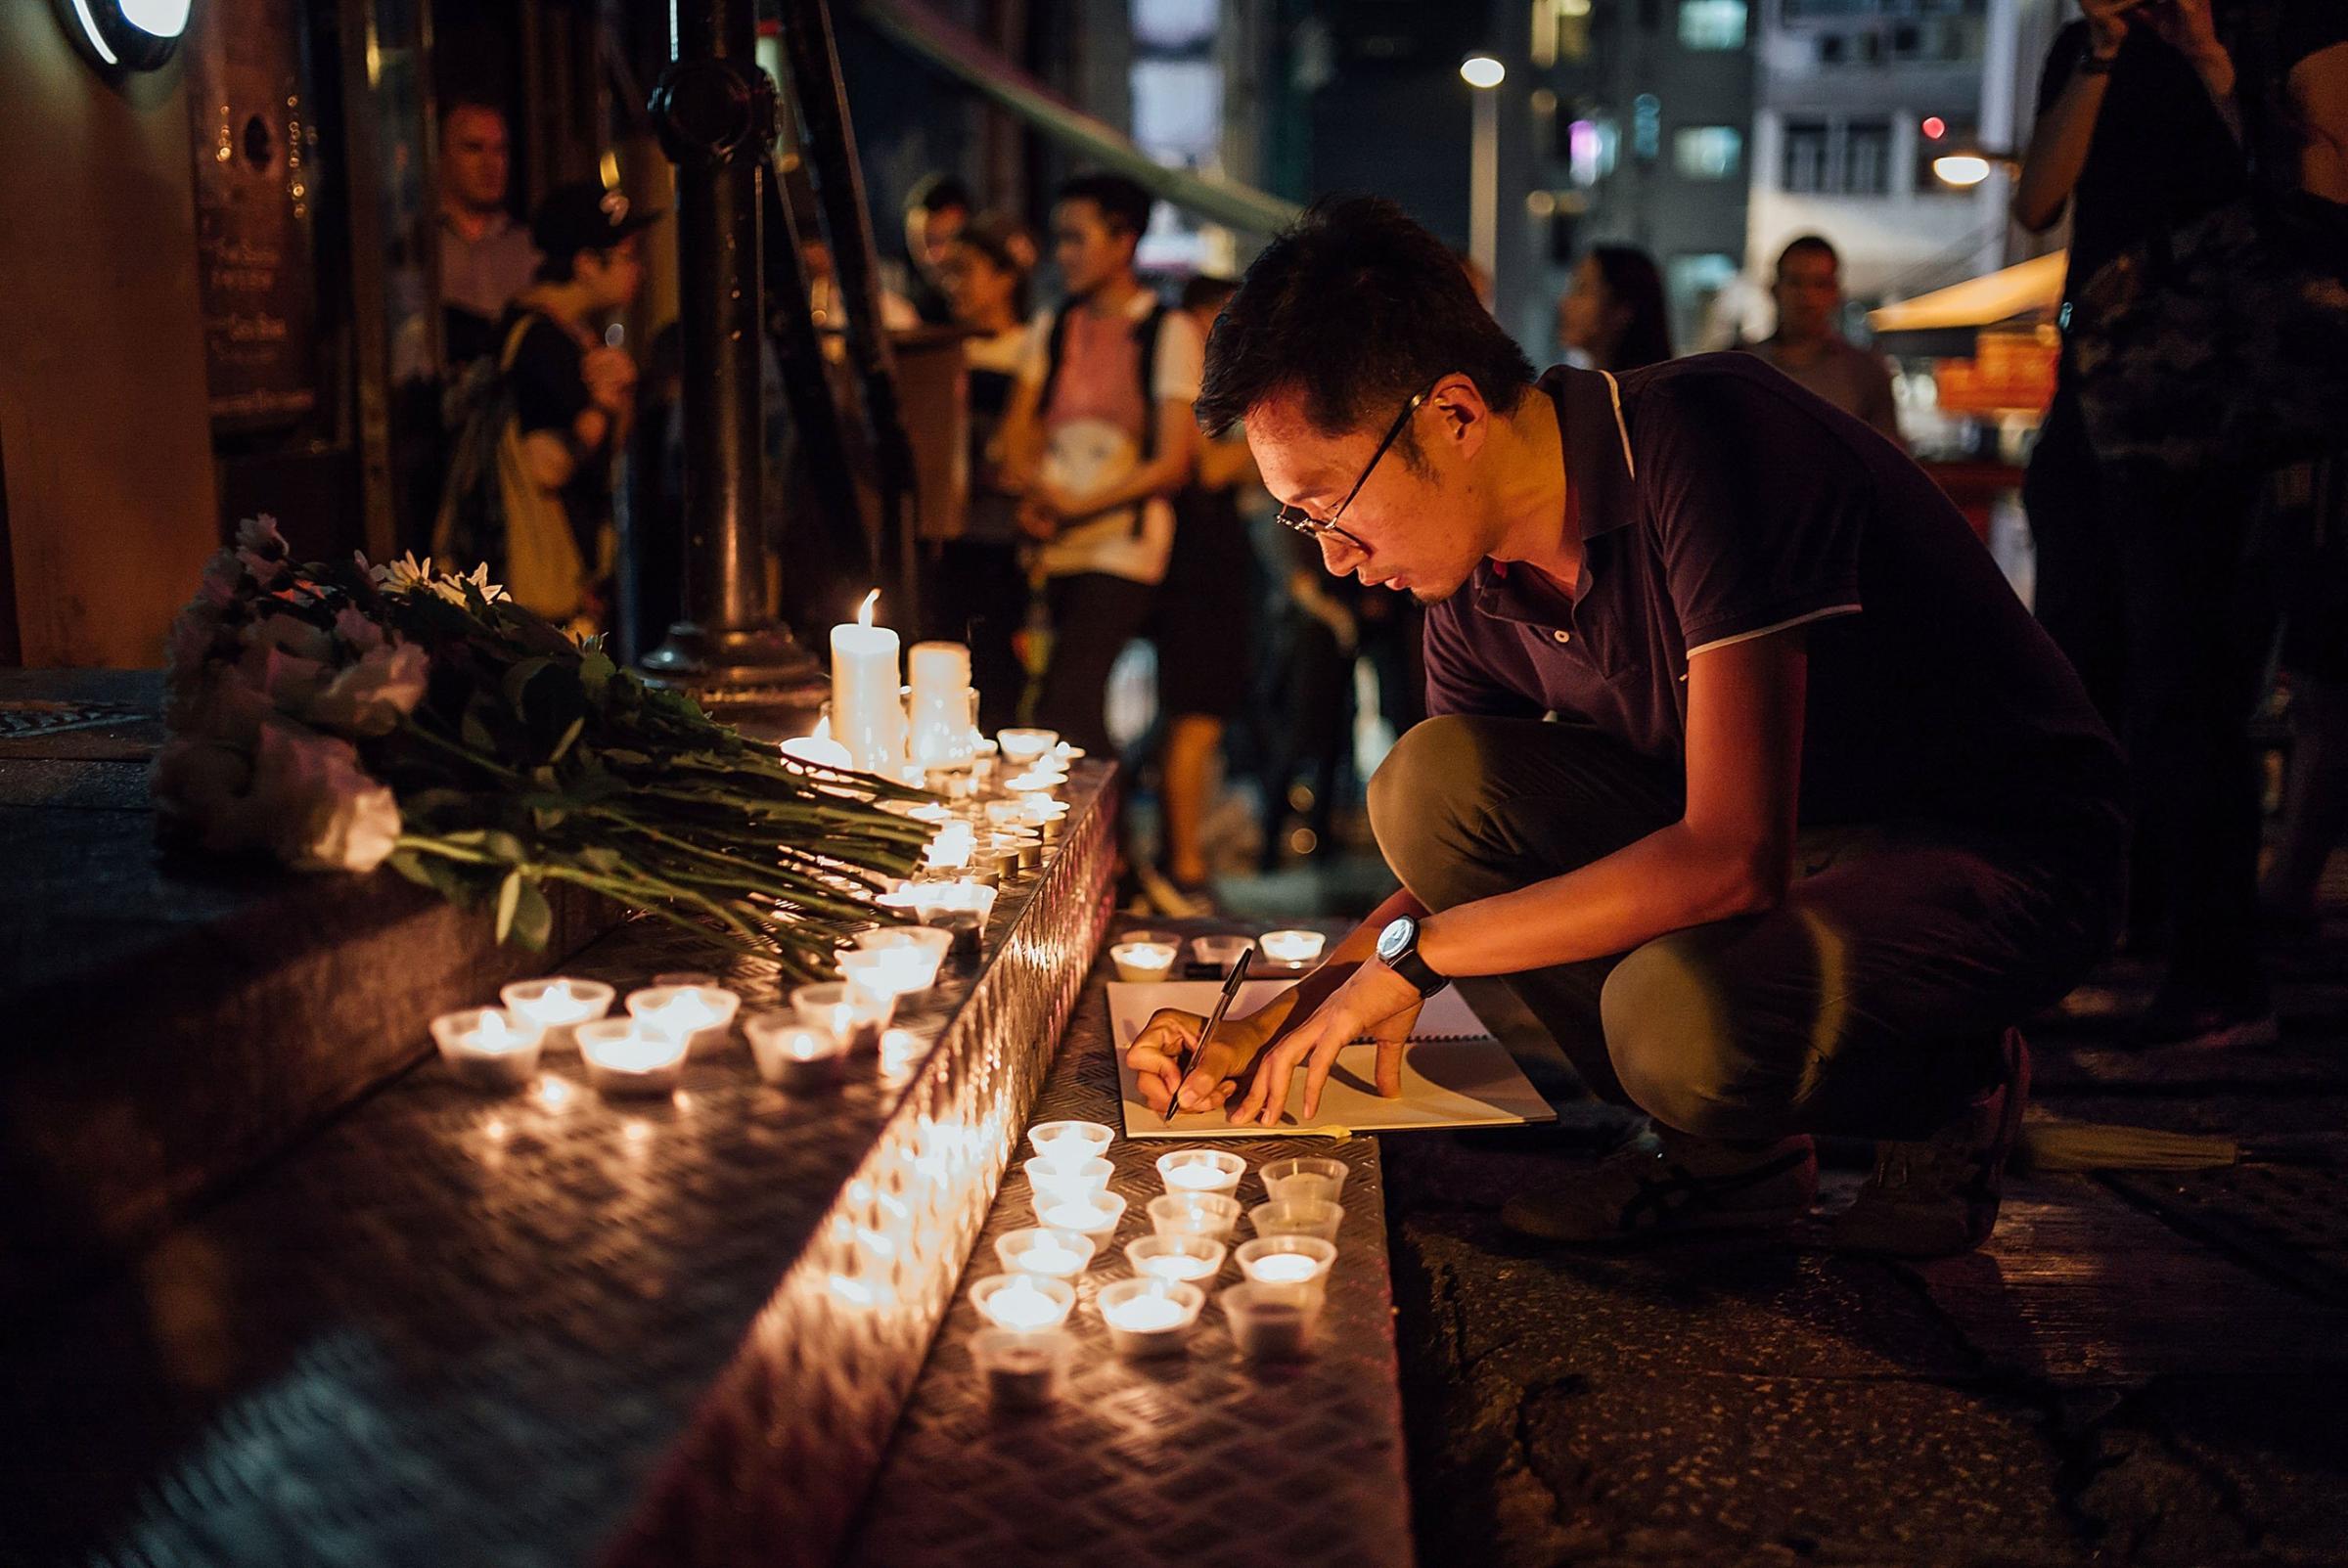 People take part in a candlelight vigil for the victims of a shooting in a gay nightclub in Orlando, Florida in Hong Kong, Hong Kong on June 13, 2016.